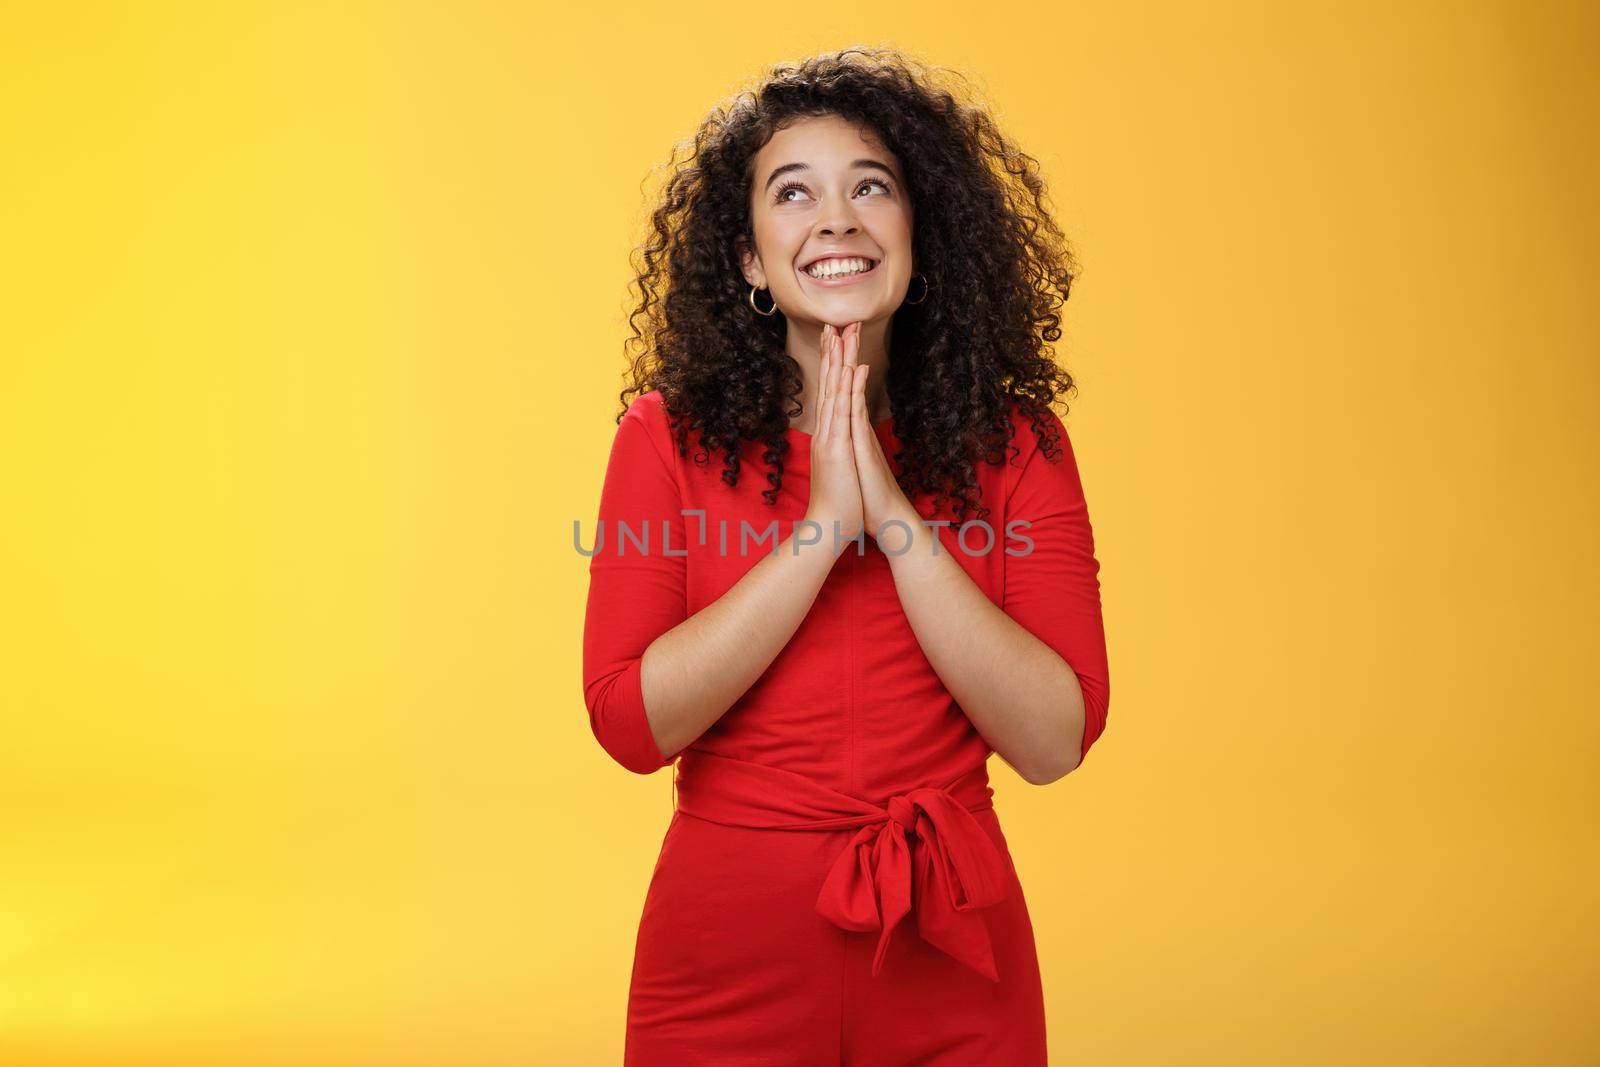 Dreamy excited cute b-day girl with curly hair in cute red dress rubbing palms together near chest as hands in pray smiling looking up delighted and hopeful making wish over yellow background.